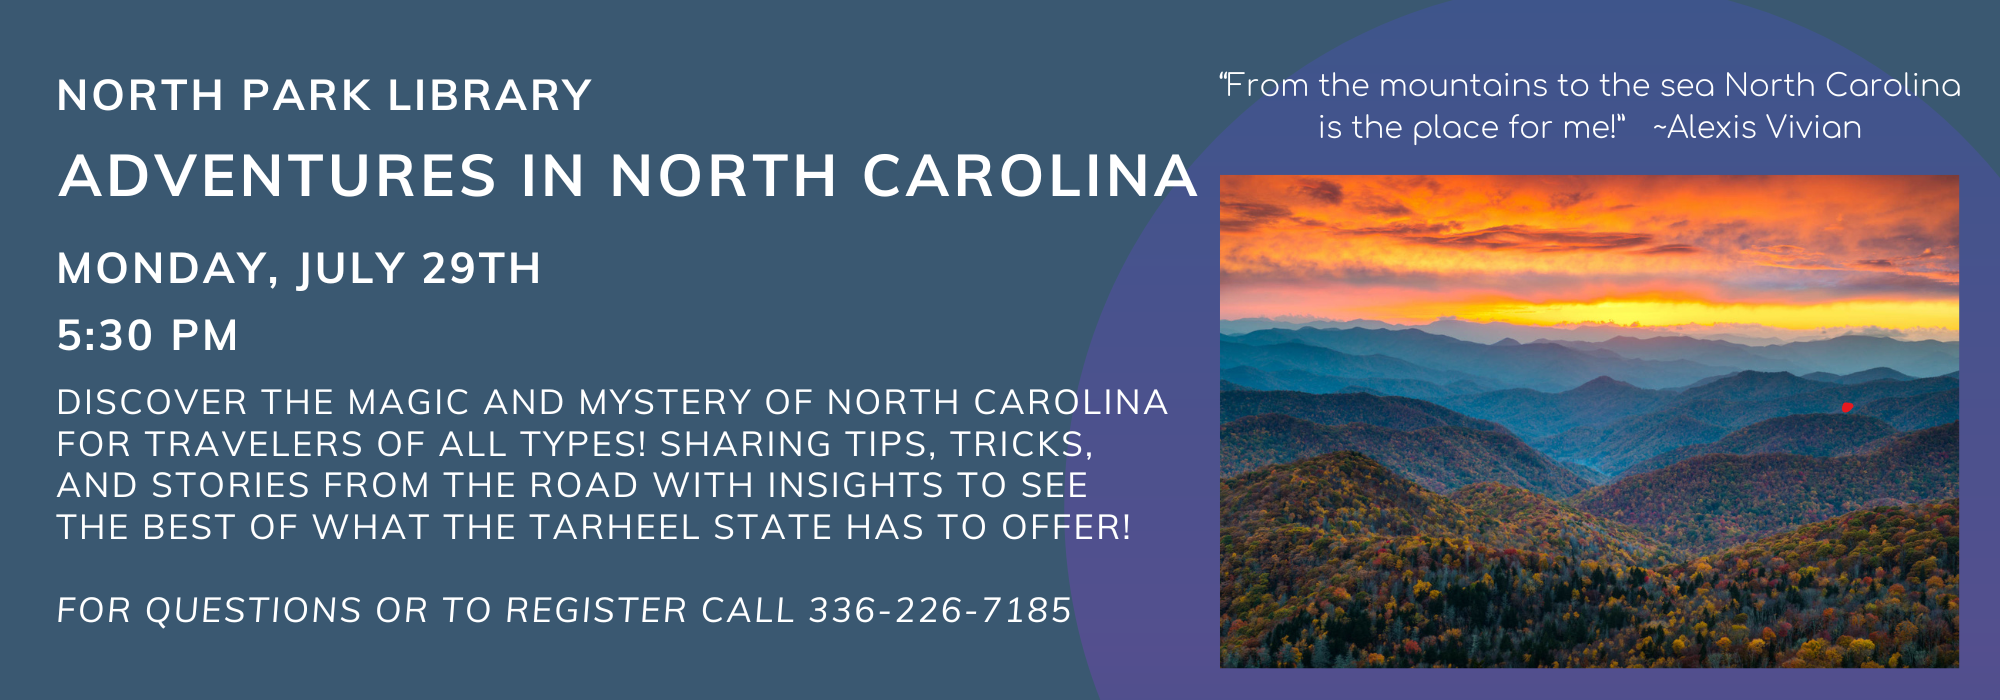 7.29 at 530 pm – Adventures in NC at North Park